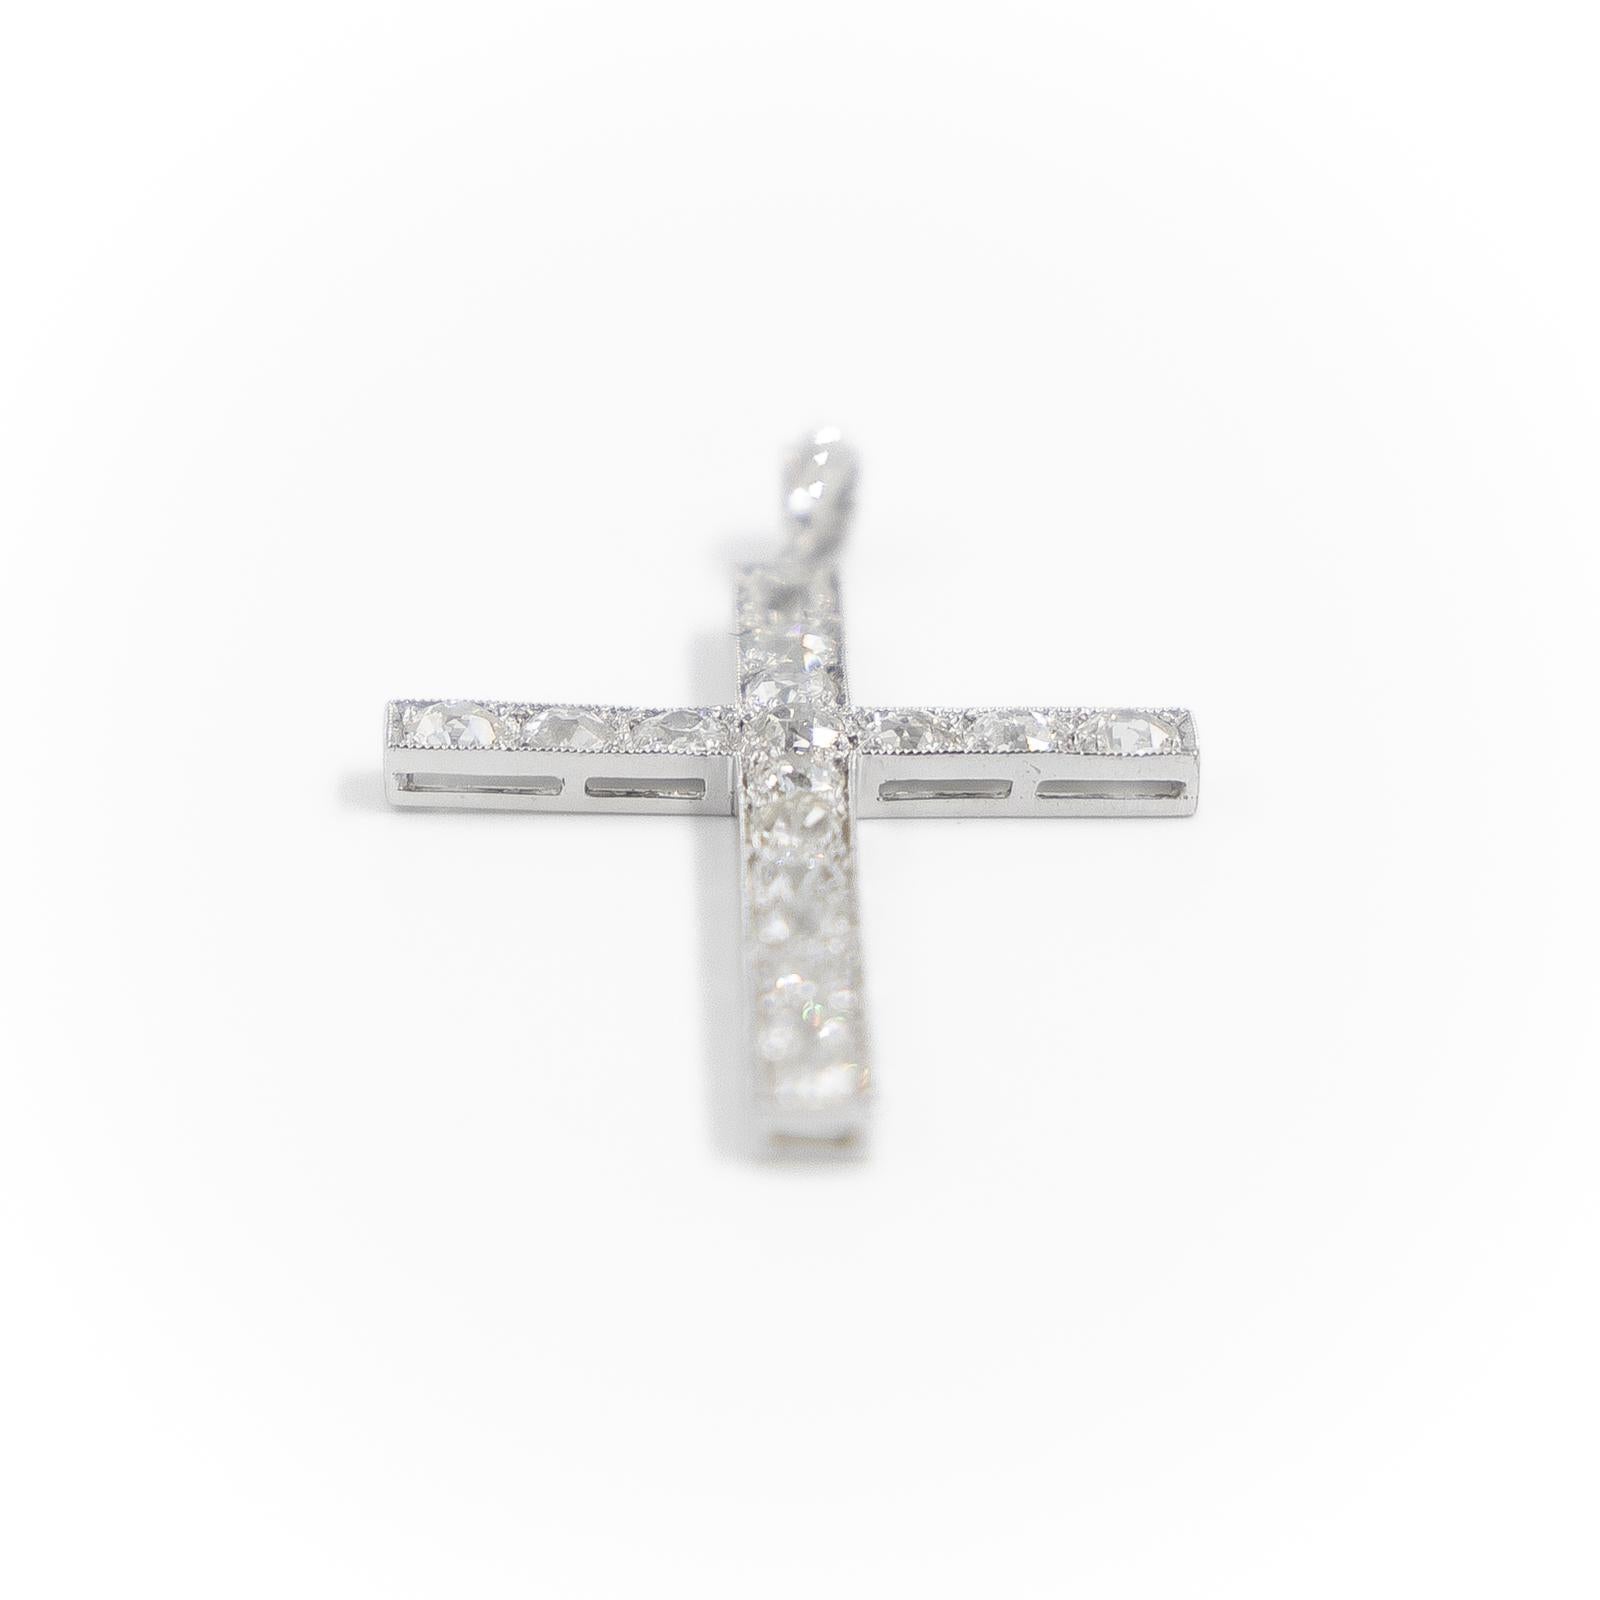 Pendant in platinum 900 thousandths. representing a catholic cross. set with 20 diamonds. 17 of them old cut of about 0.10 ct each. and 3 rose cut diamonds on the setting. 2 of about 0.01 ct each and one of about 0.03 ct. Length: 4.45 cm. Width: